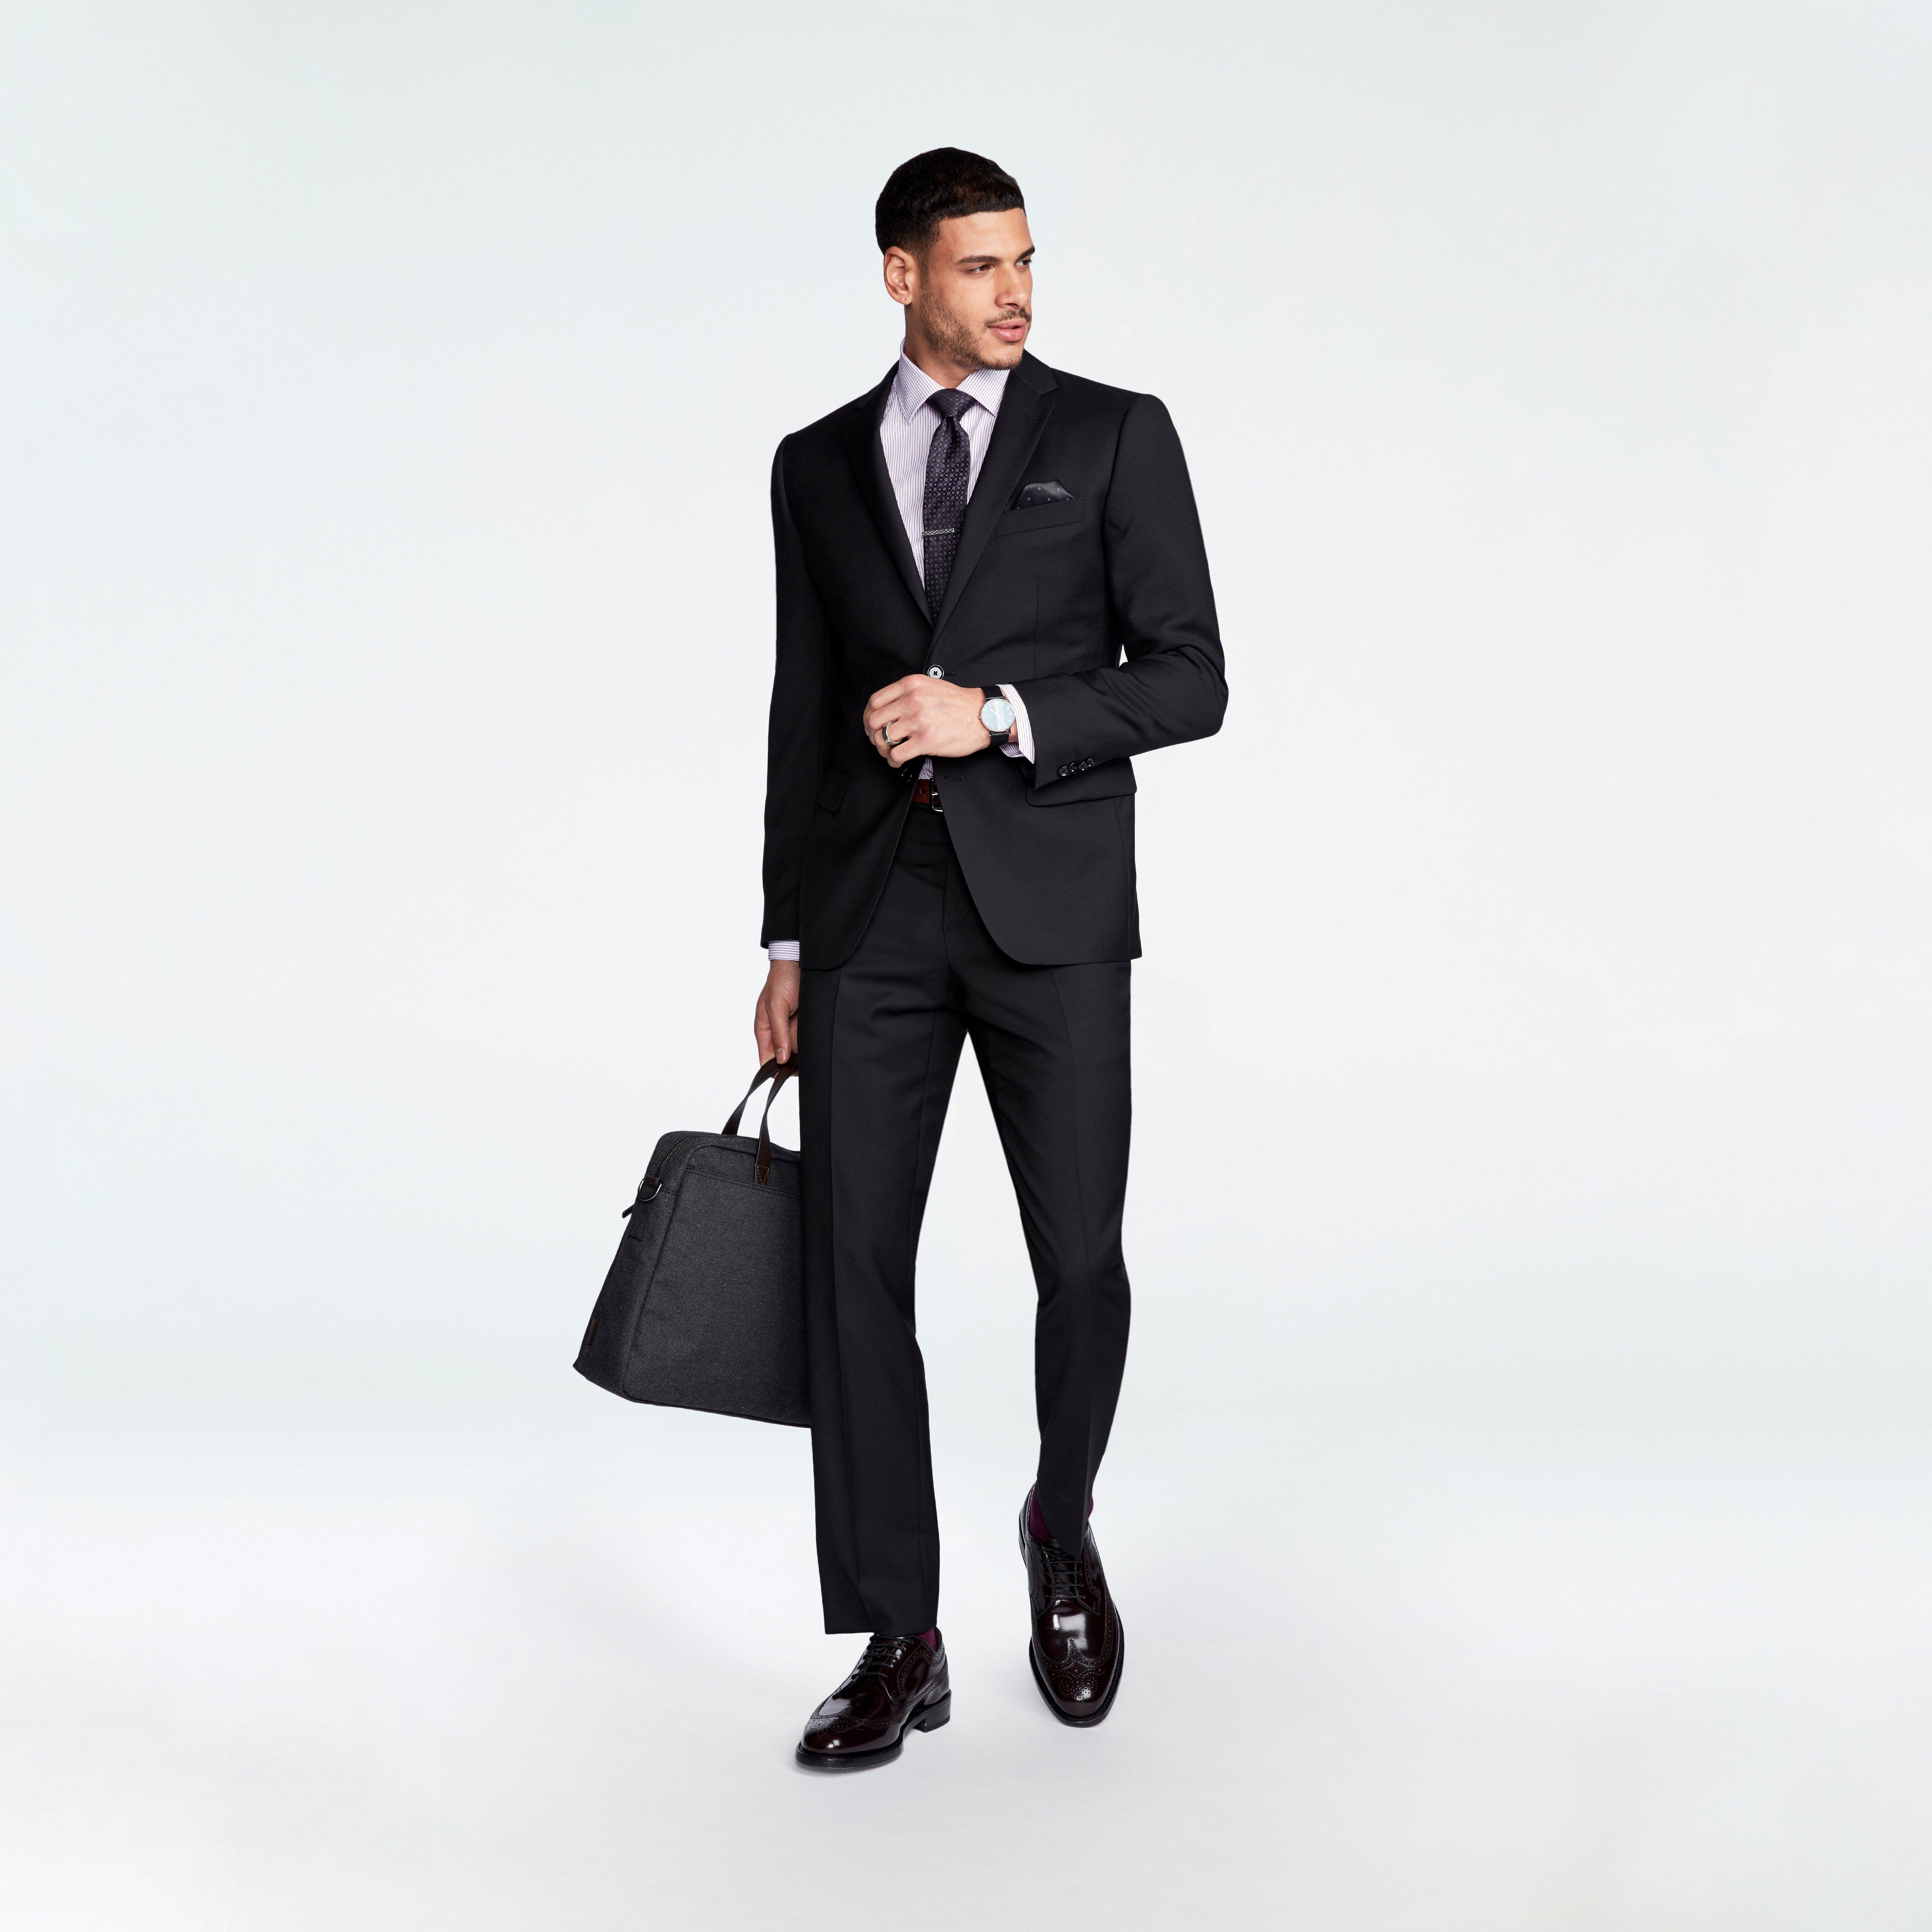 What is the best formal shirt combination with black suit? - Quora